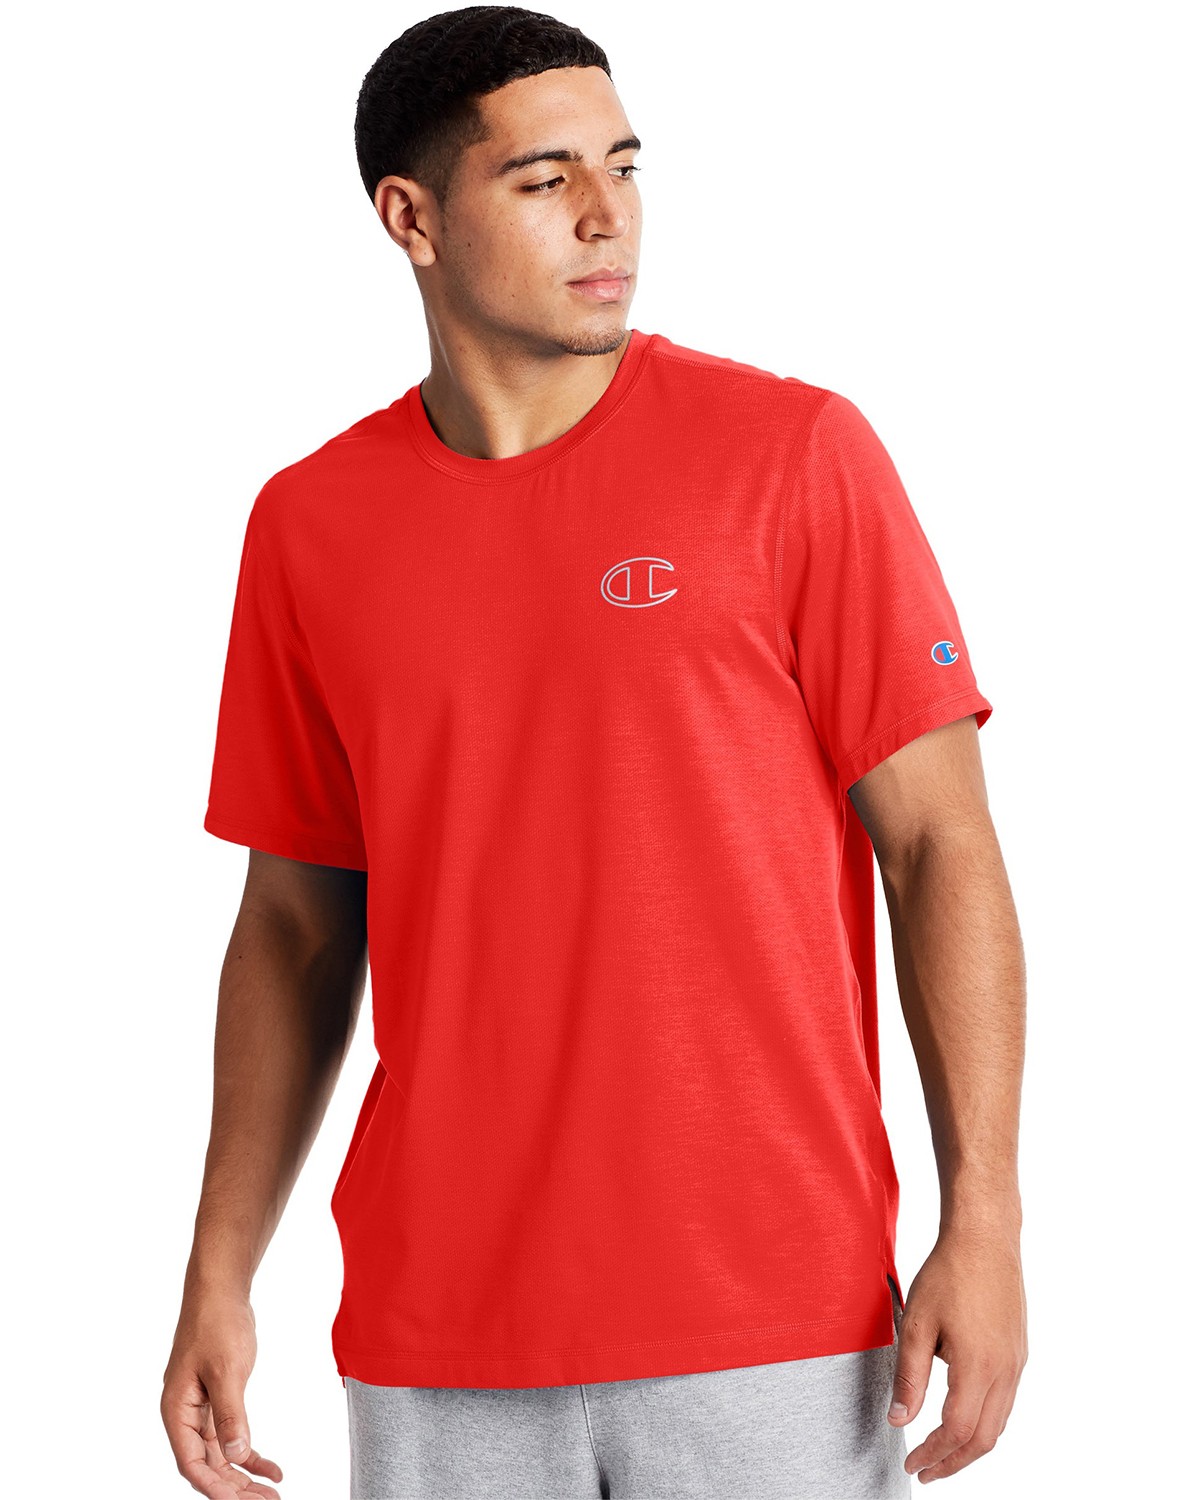 Champion T5704 550744 Sport Tee - Free Shipping Available